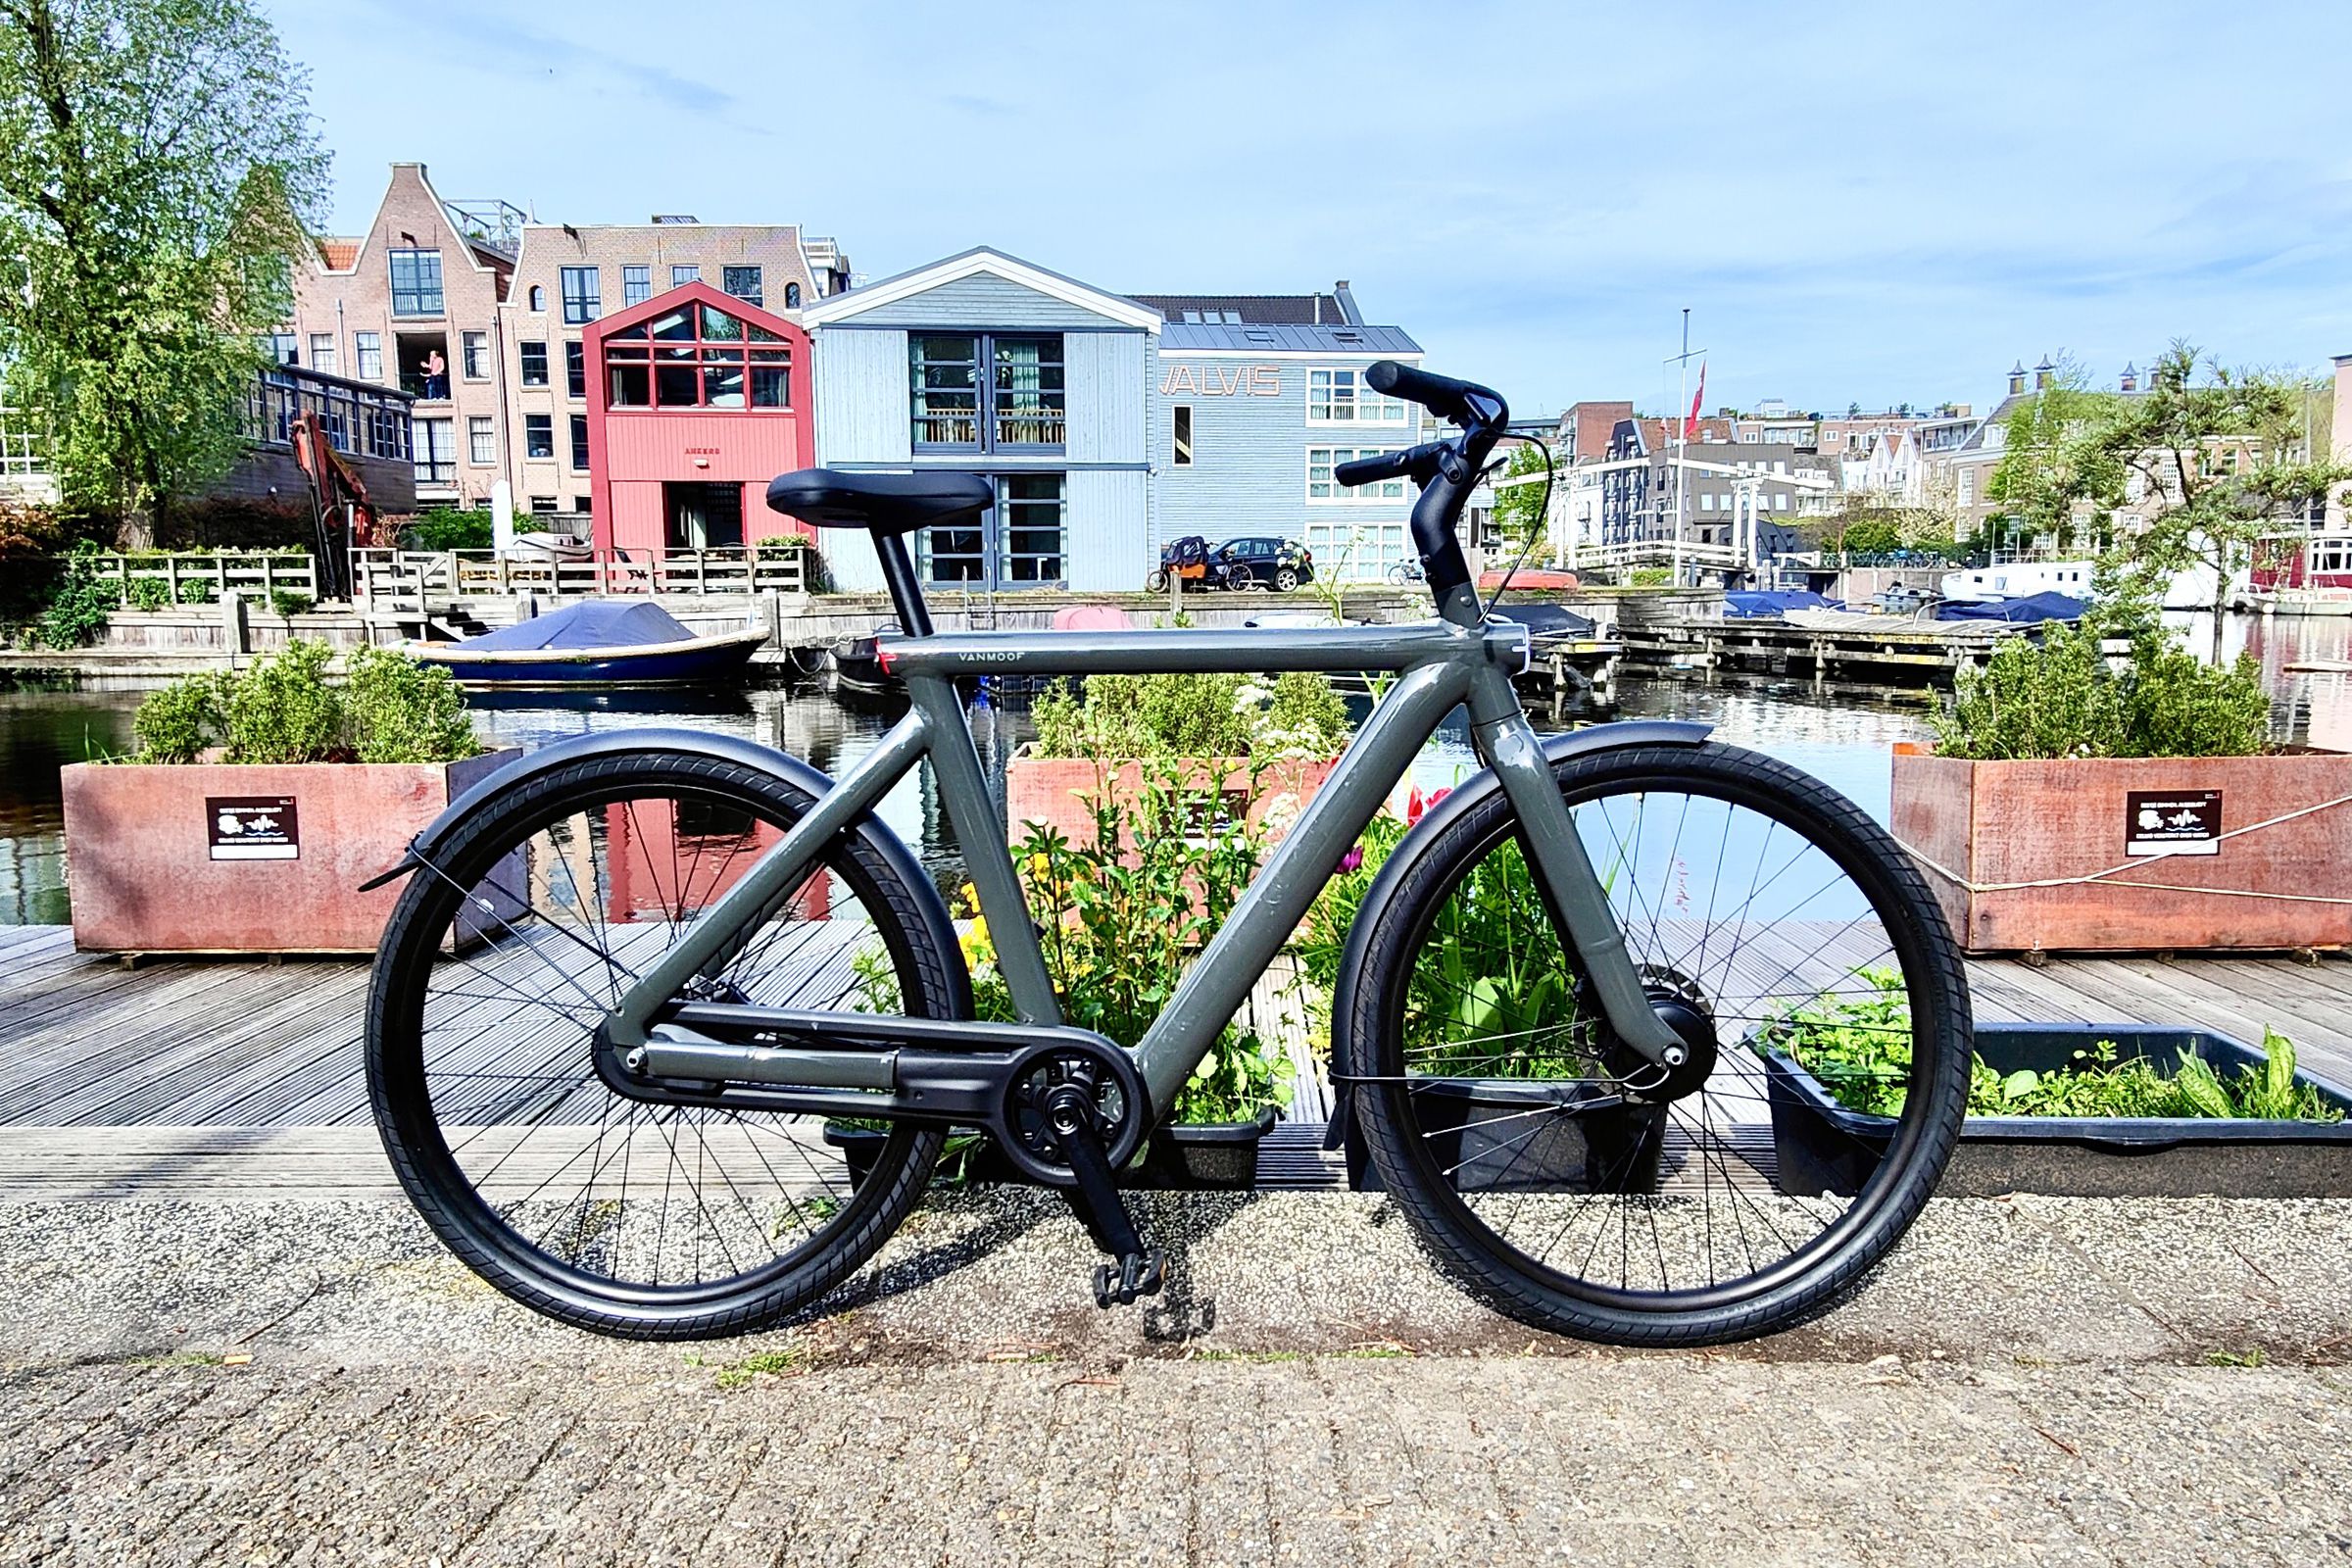 A dark gray electric VanMoof S5 bicycle stands in the foreground with modern Dutch homes, some light blue and red, in the background surrounded by water under a clear sky.